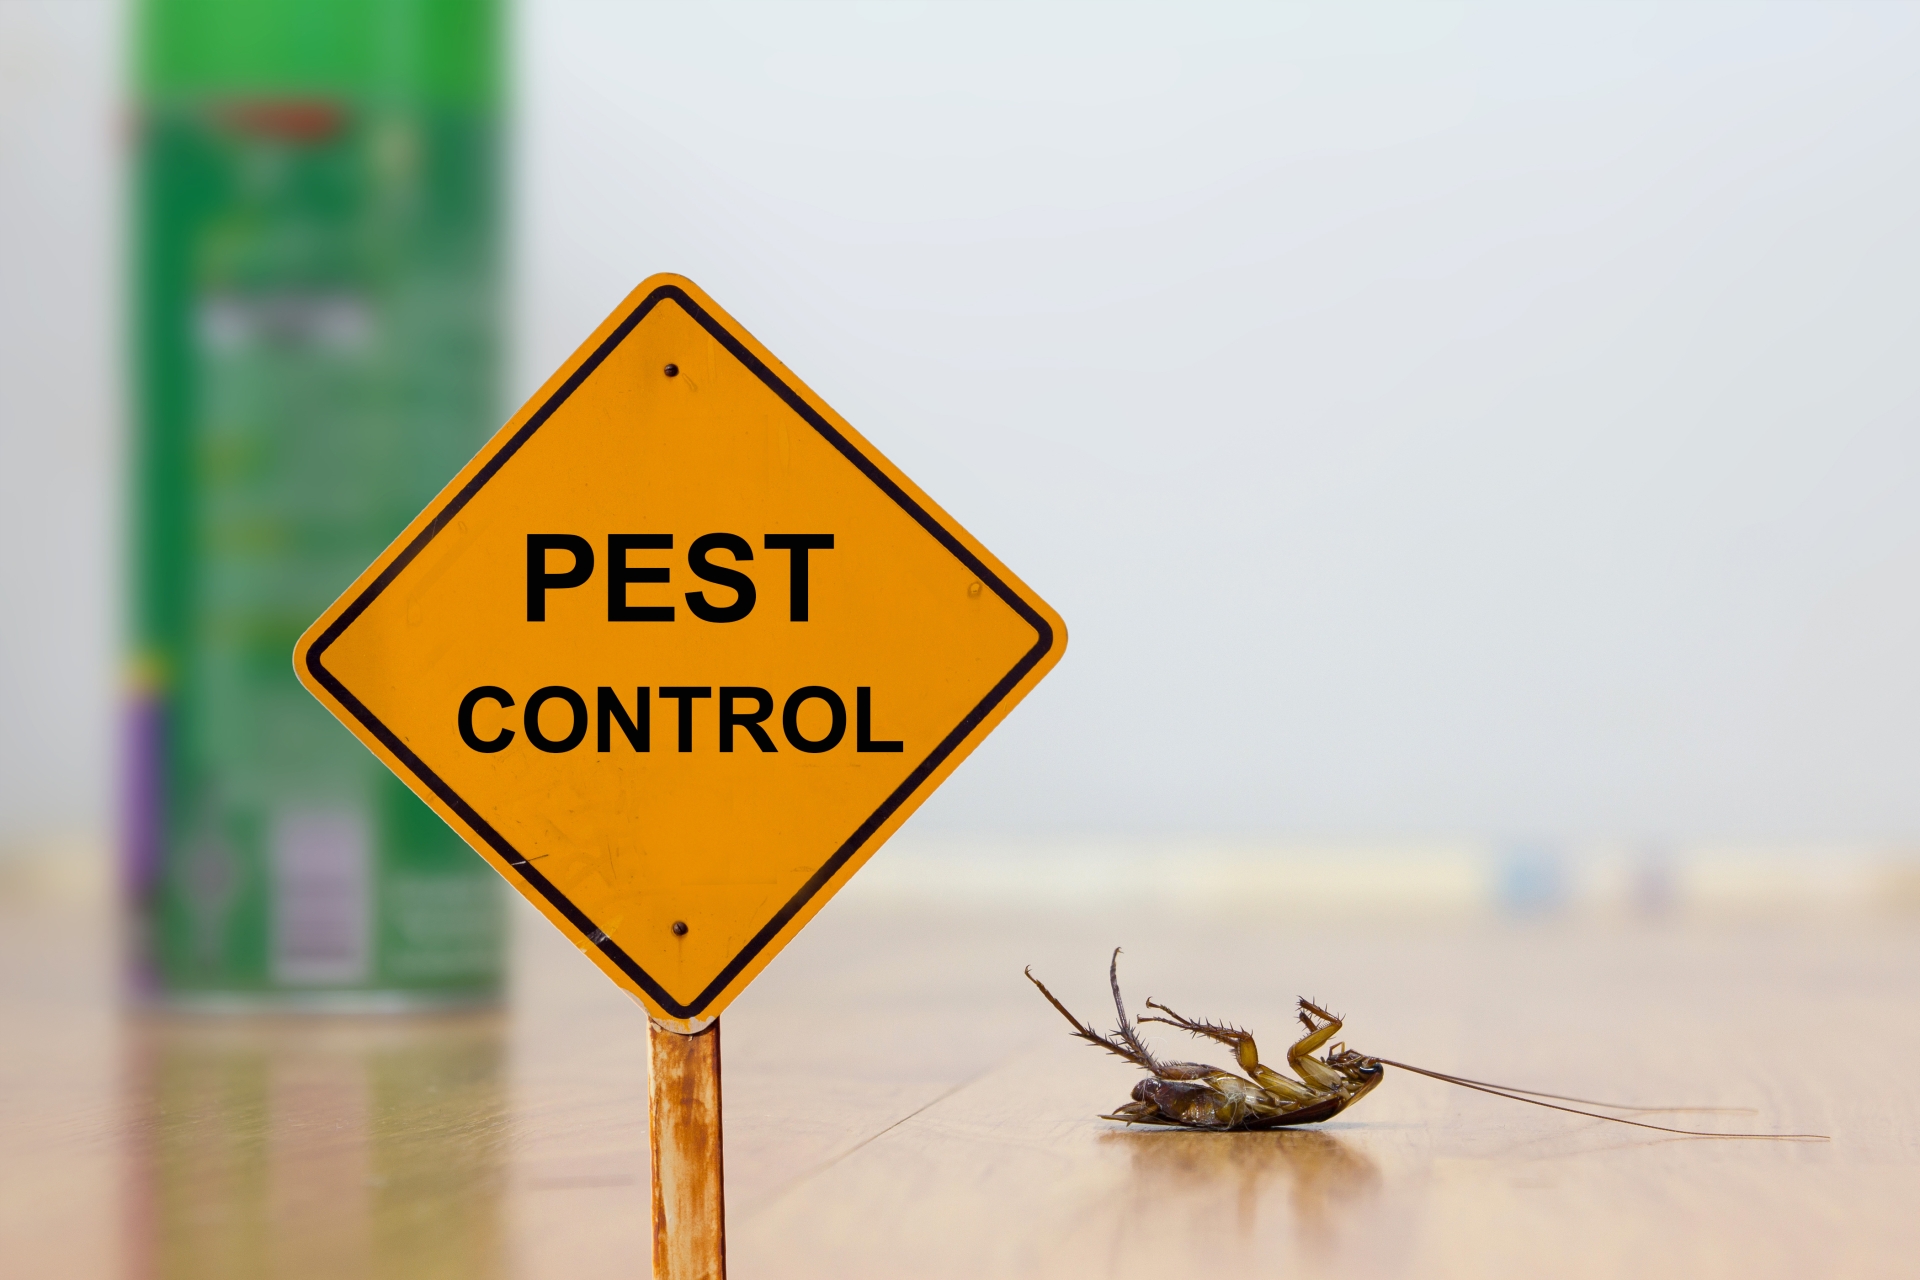 24 Hour Pest Control, Pest Control in Canning Town, North Woolwich, E16. Call Now 020 8166 9746